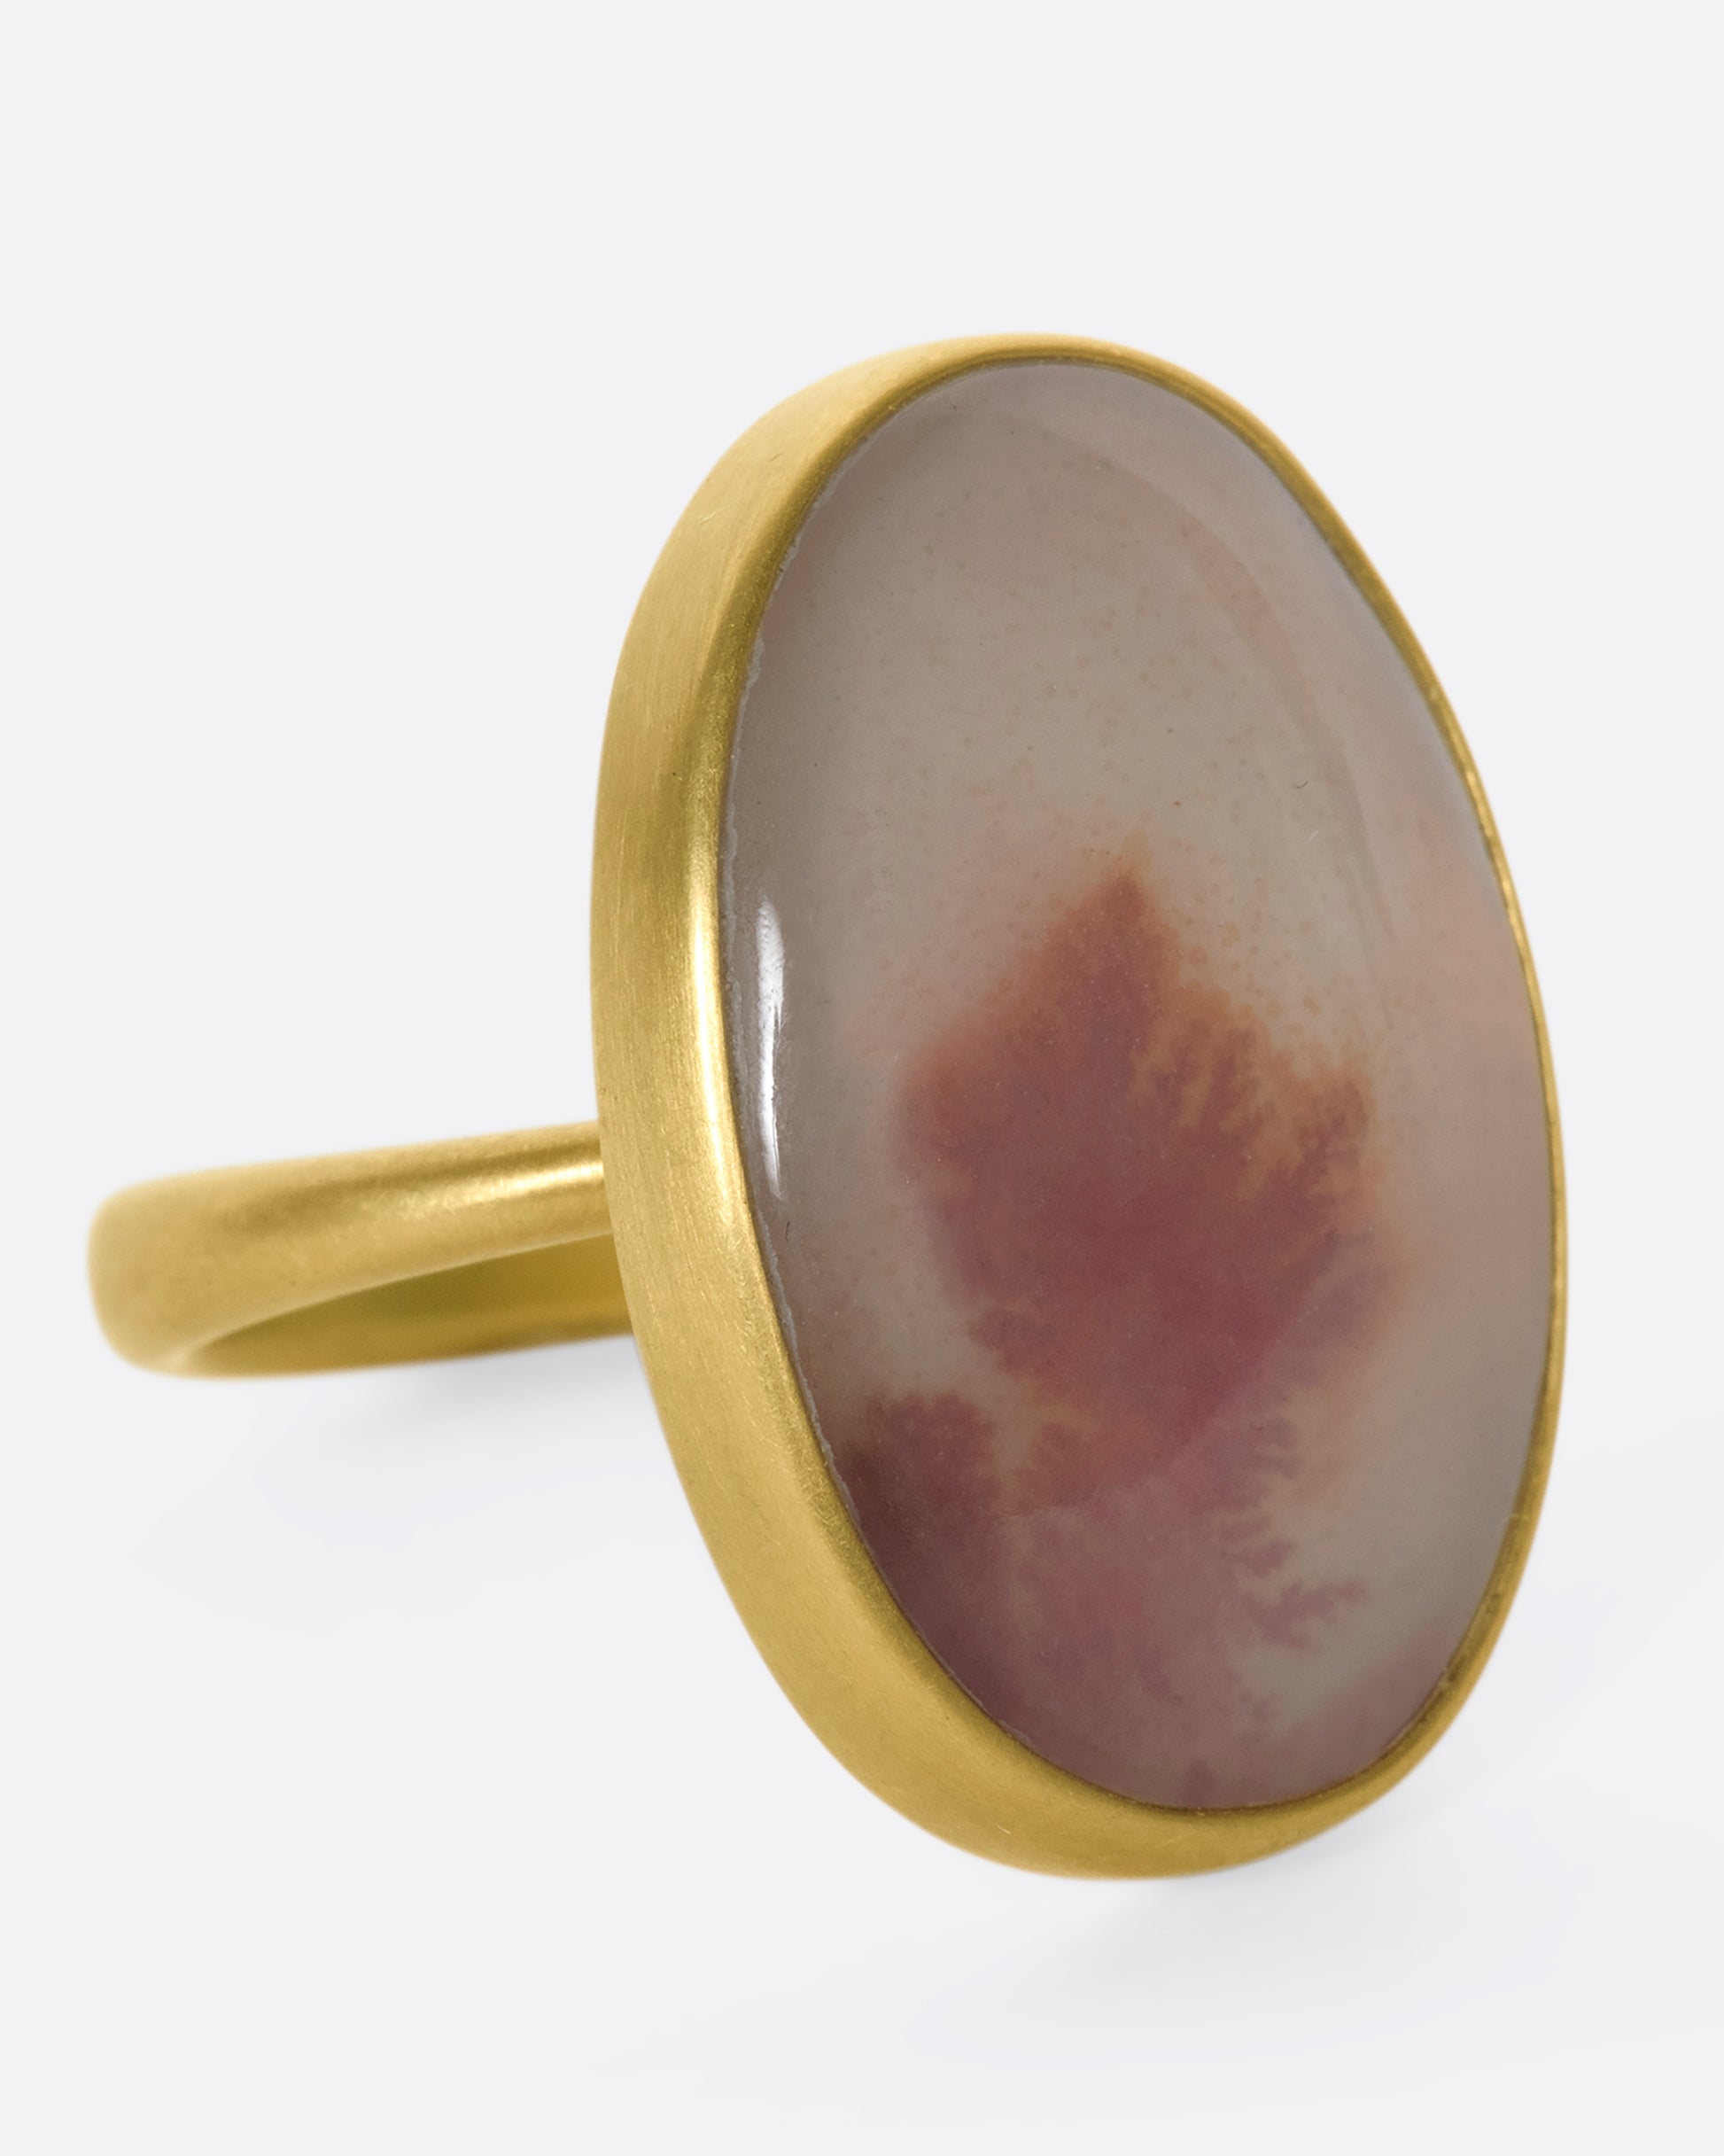 A 14k gold oval dendritic agate quartz ring. The band is perfectly weighted, so the quartz never falls to the side